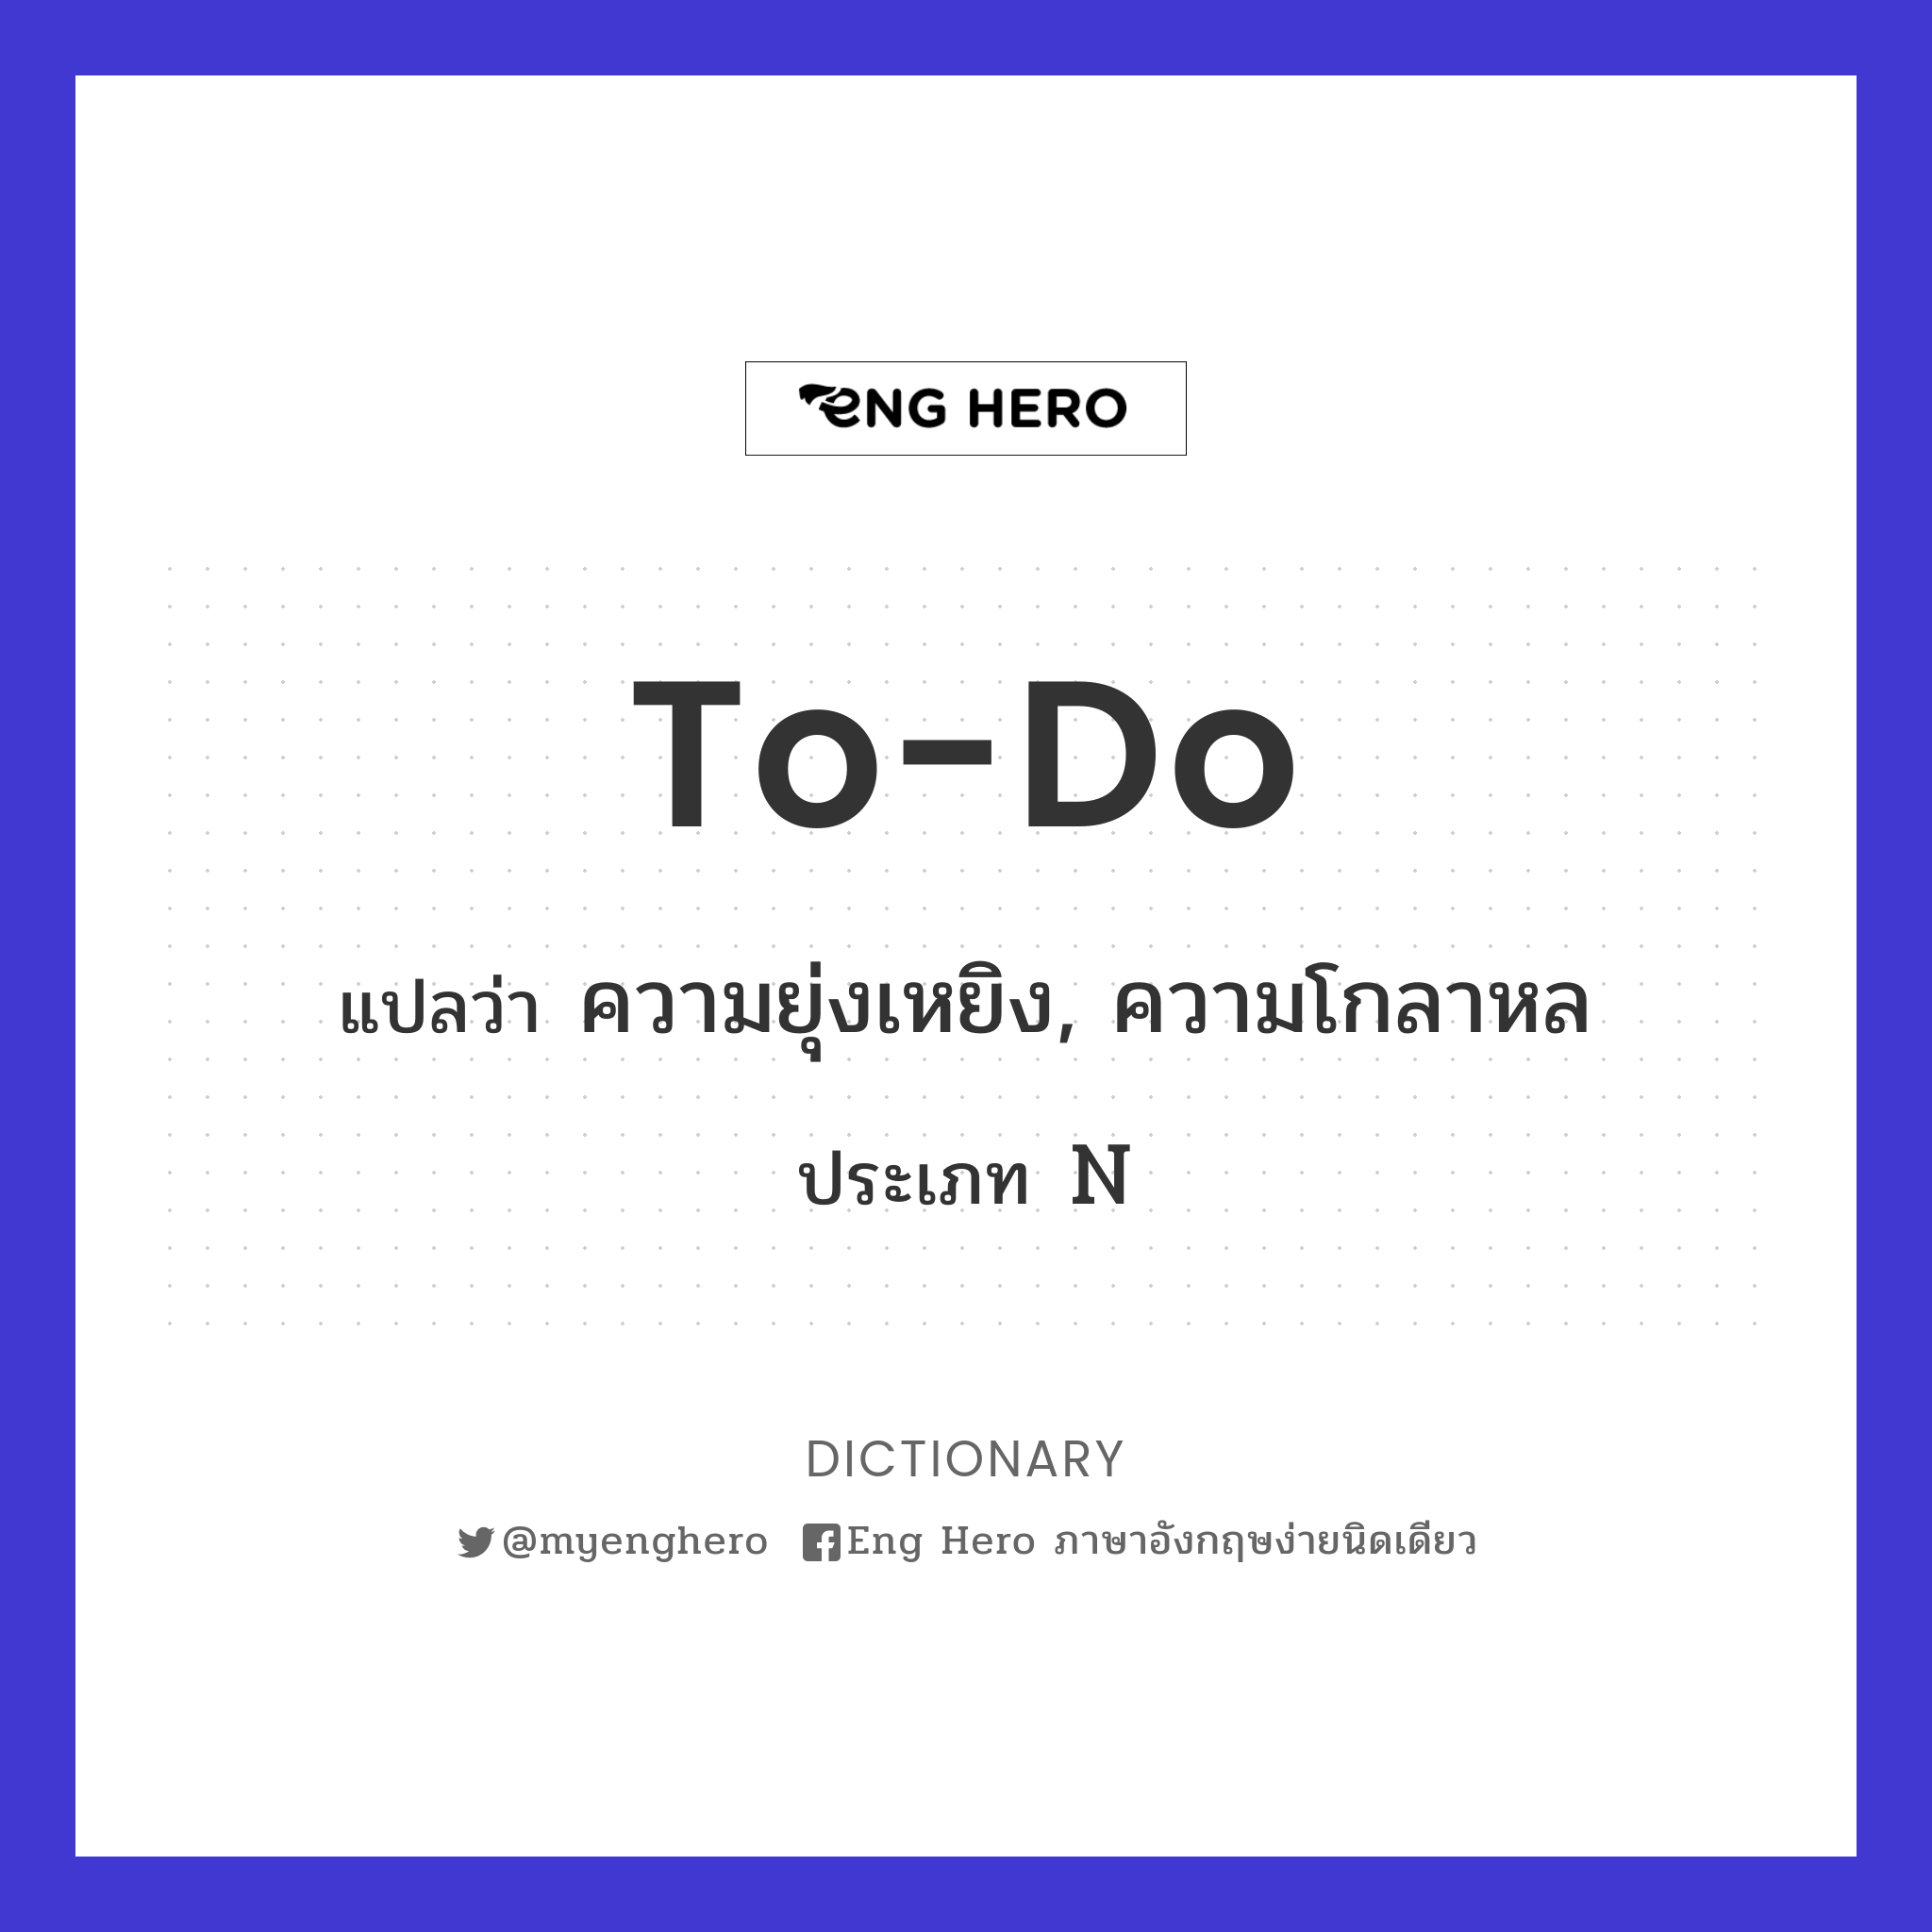 to-do